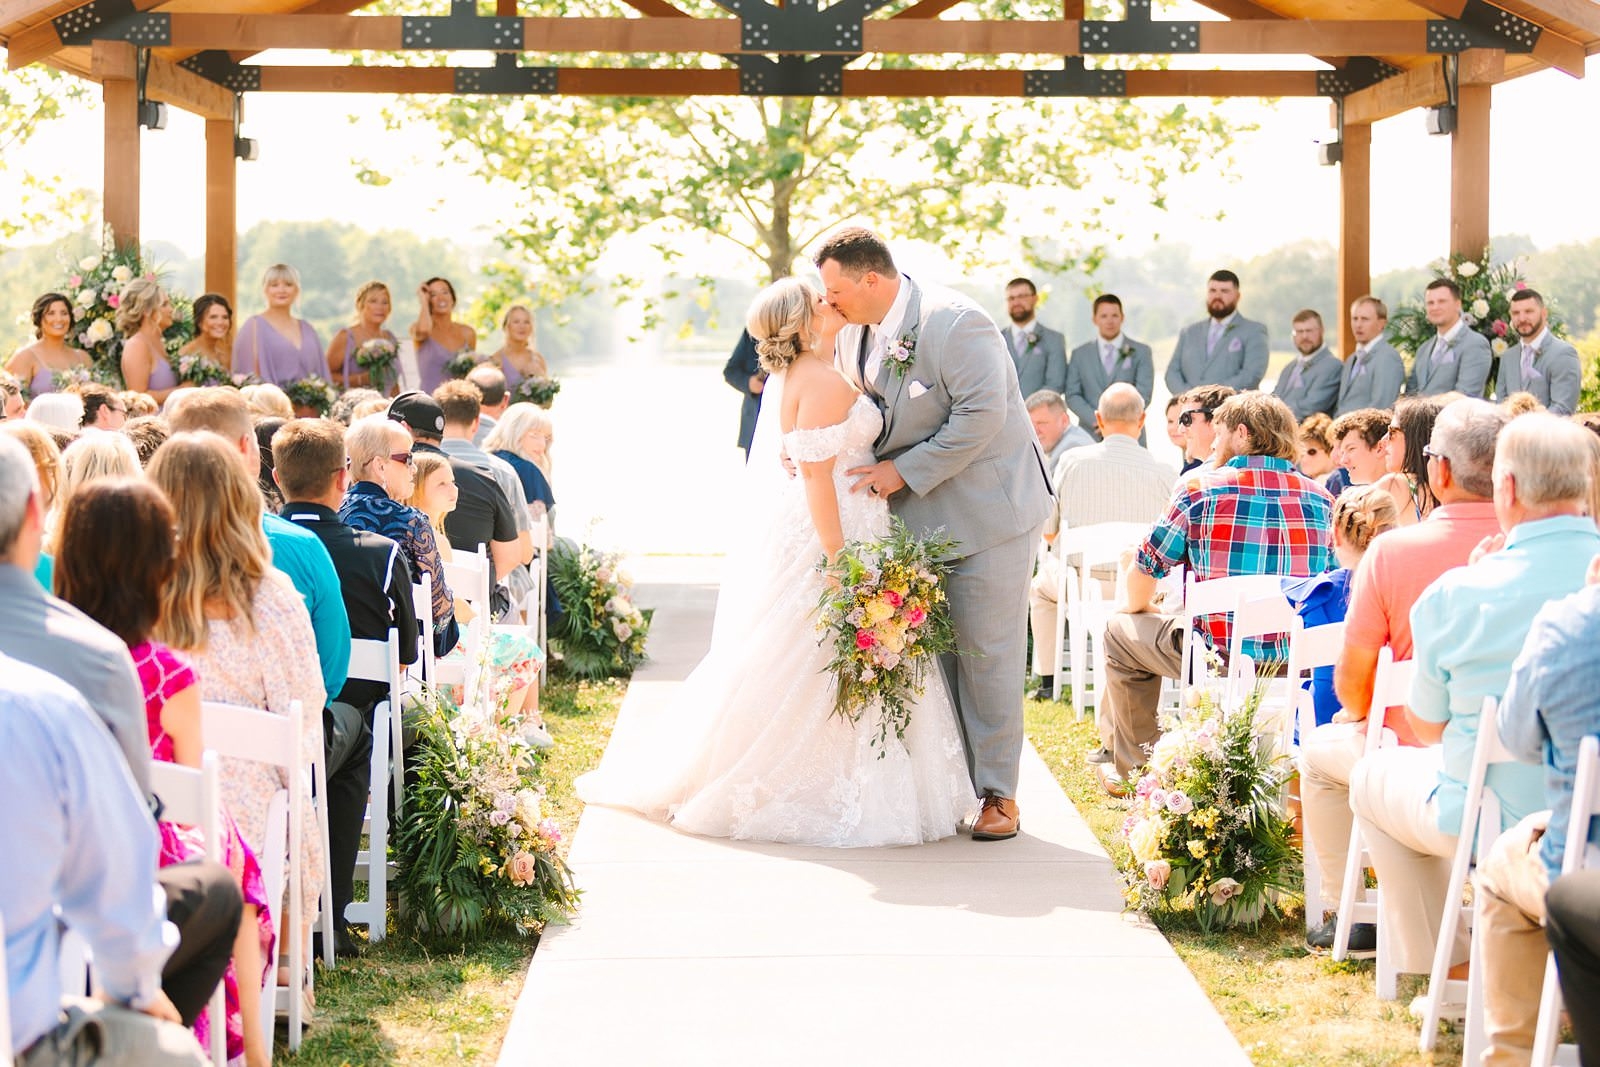 A Sunny Summer Wedding at Friedman Park in Newburgh Indiana | Paige and Dylan | Bret and Brandie Photography138.jpg